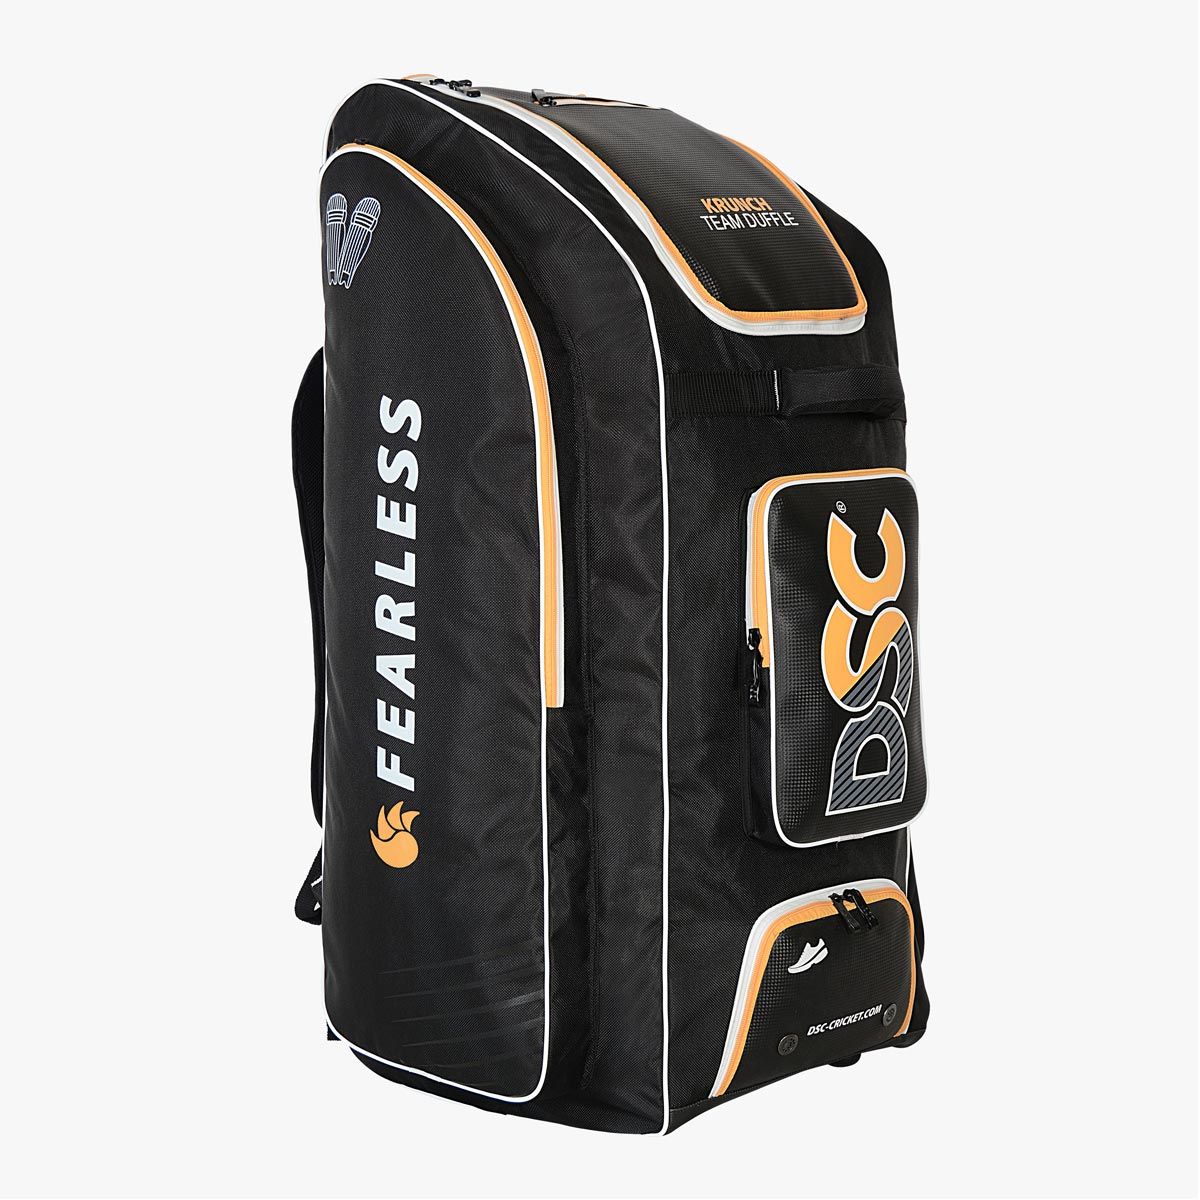 Bags & Bagpacks Archives - Shrey Sports | Official Store